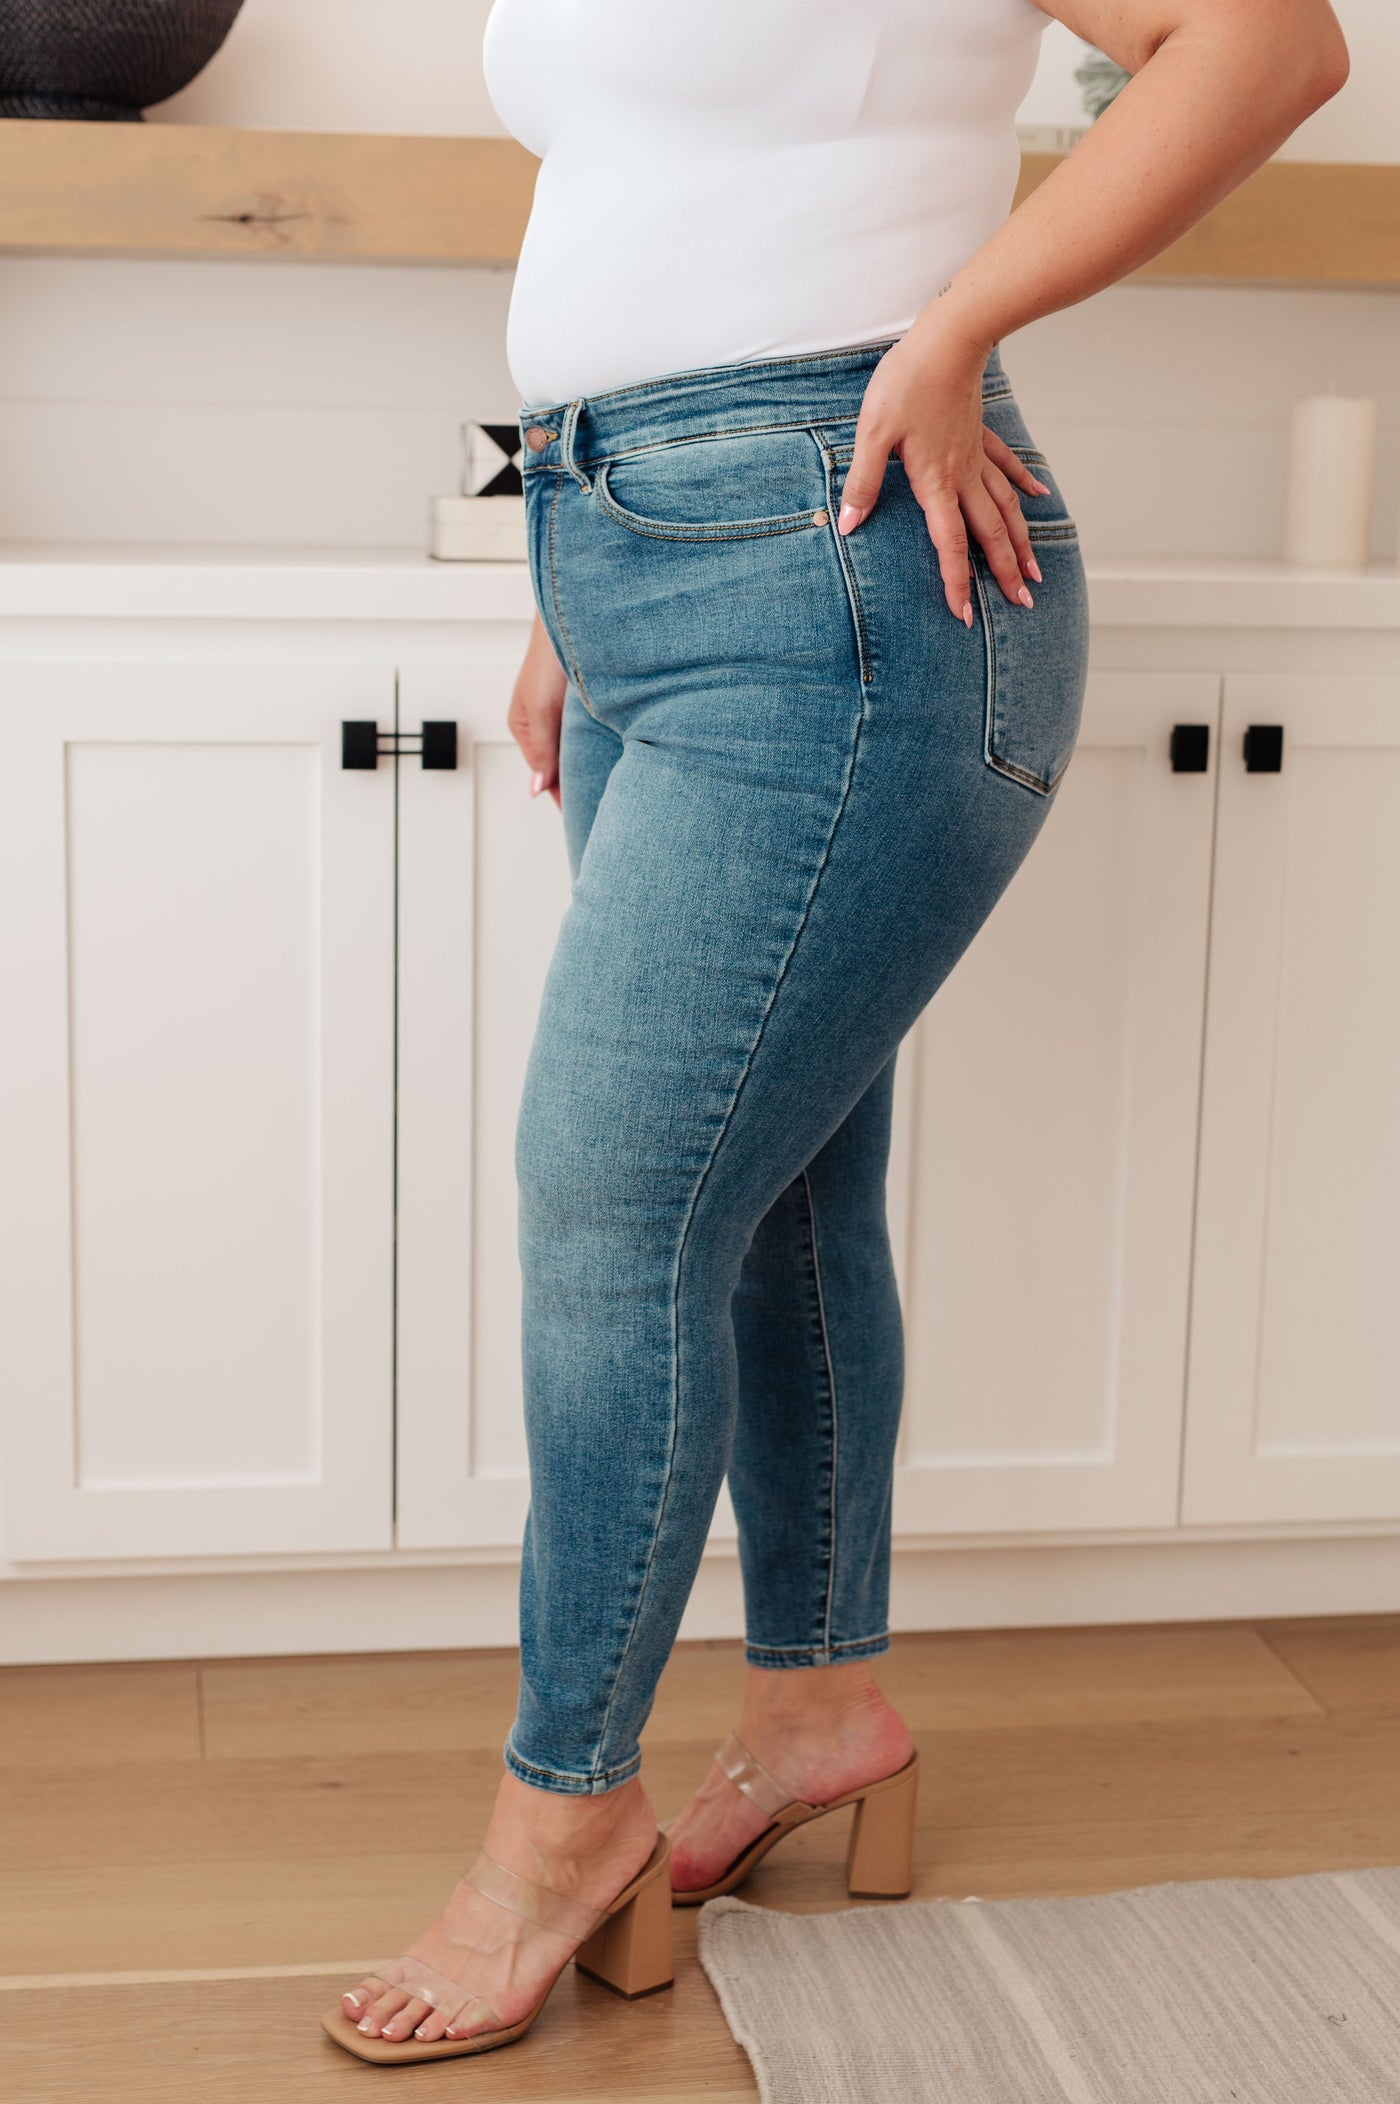 Stay comfortable and stylish in these Bryant High Rise Thermal Skinny Jeans from Judy Blue. Made with brushed thermal denim, they provide a soft and warm feel that's perfect for colder months